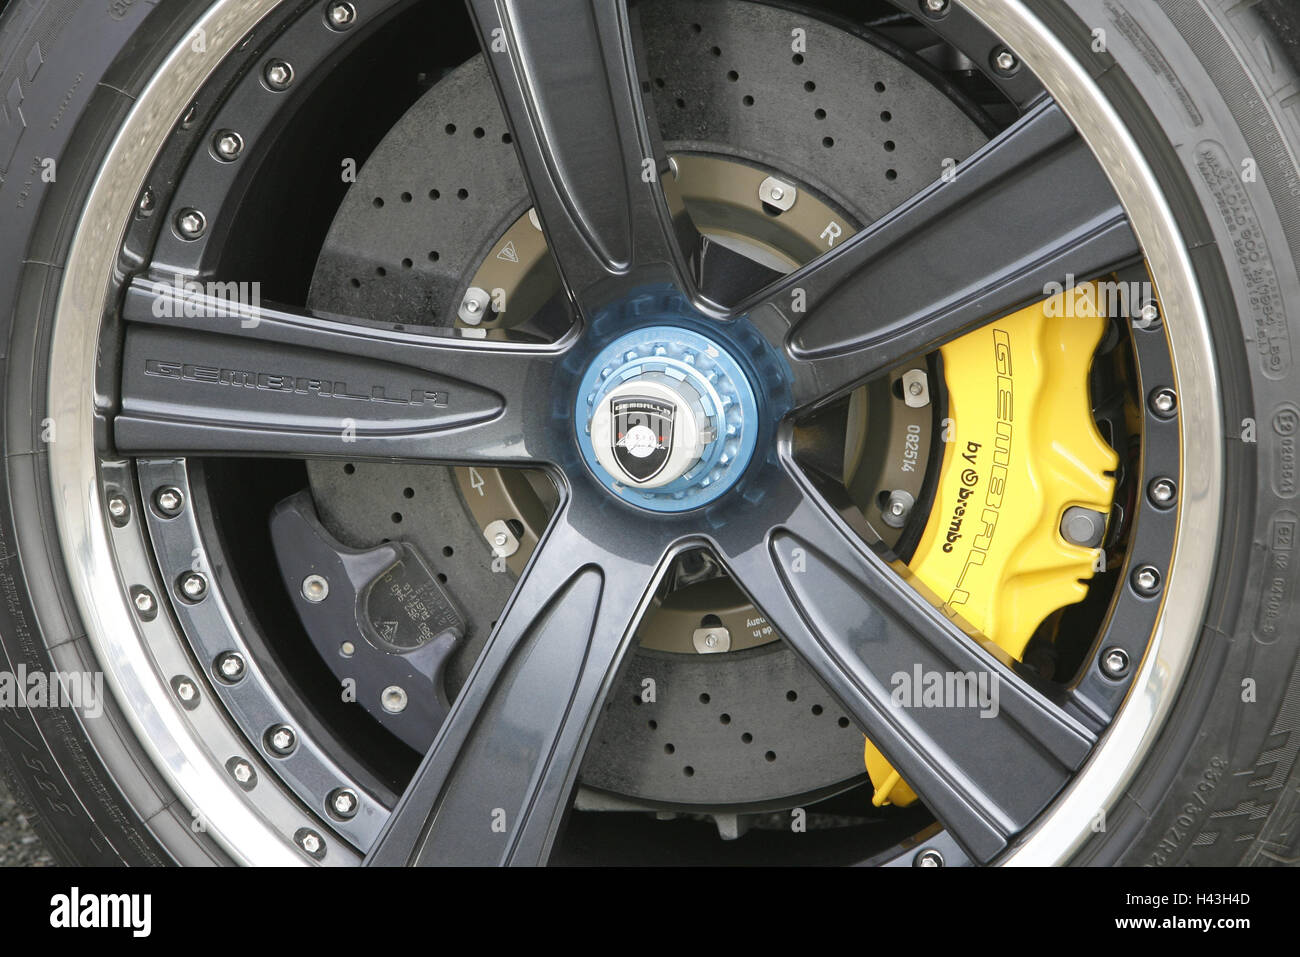 Porsche Gemballa Mirage GT, detail, wheel rim, car, Gemballa, Gemballa mood, mood, luxury, luxury car, Porsche-Mirage-GT, Porsche, Mirage-GT, tyre, radian, brake, sports car, nobly, exclusively, outside, Stock Photo